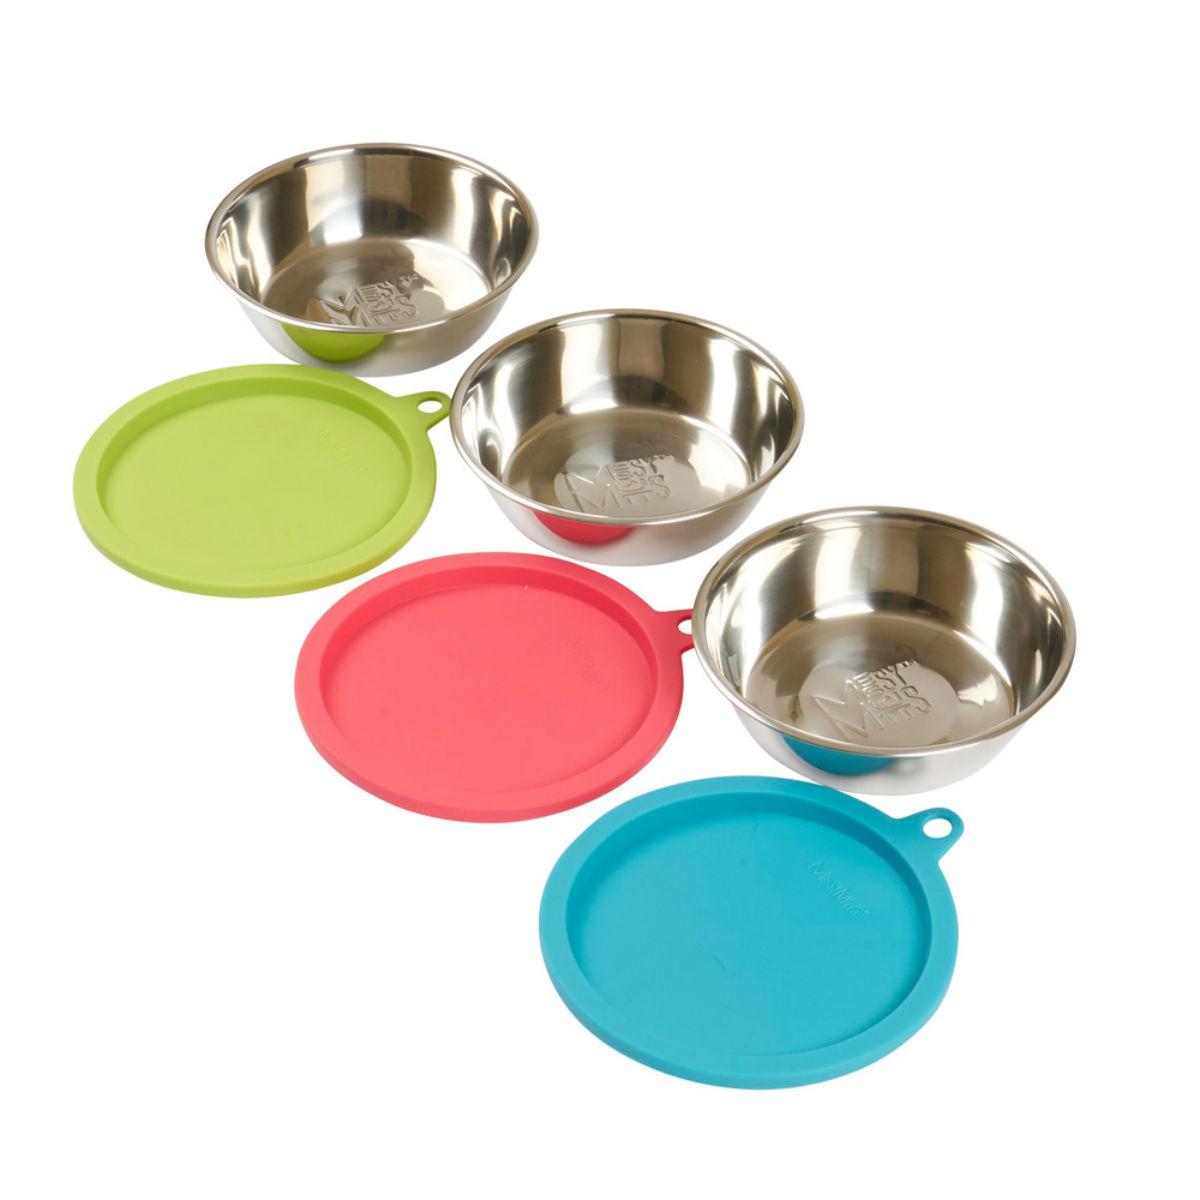 Messy Mutts Dog Bowl Saver Box Set - 3 Stainless Steel Bowls + 3 Silicone Lids